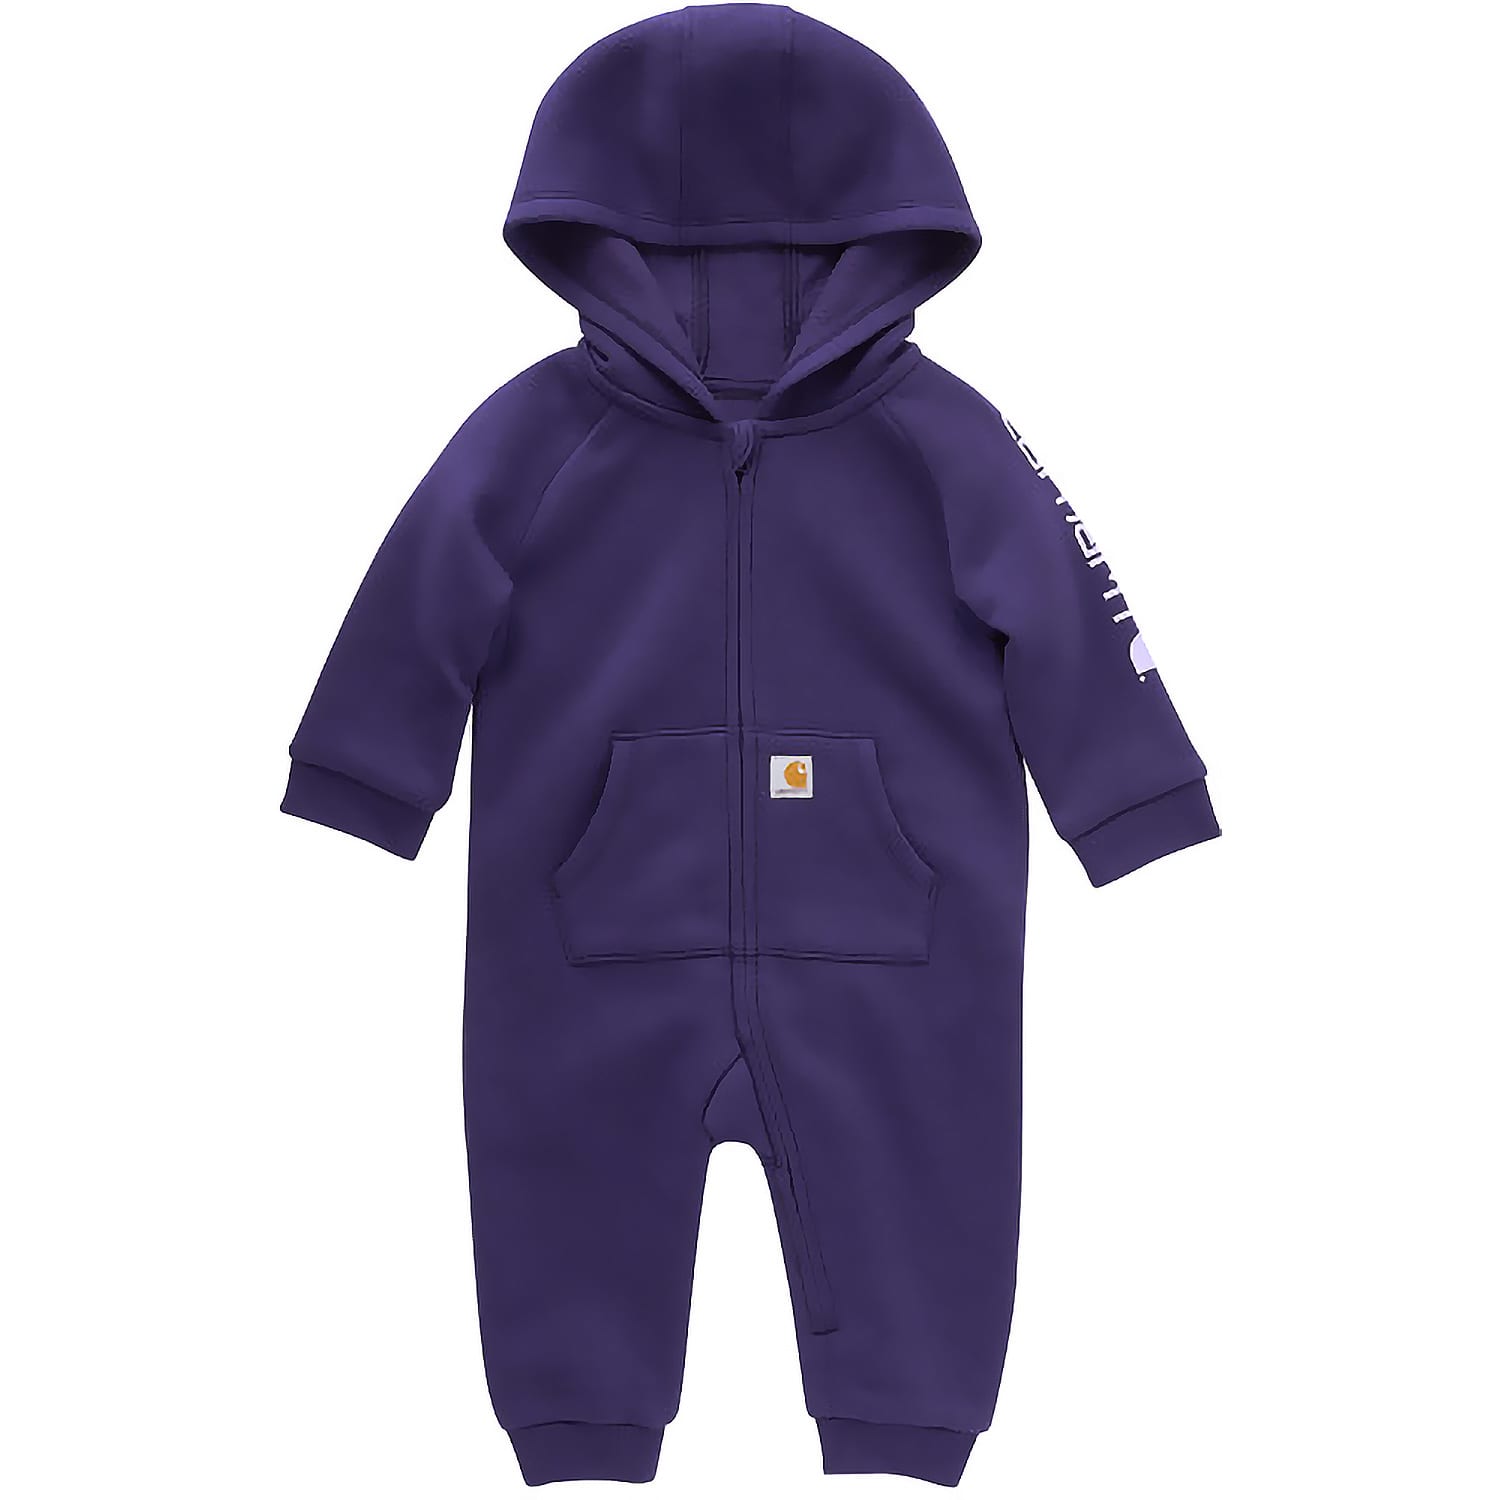 The ultimate snow clothes for children - KOMBI ™ Canada